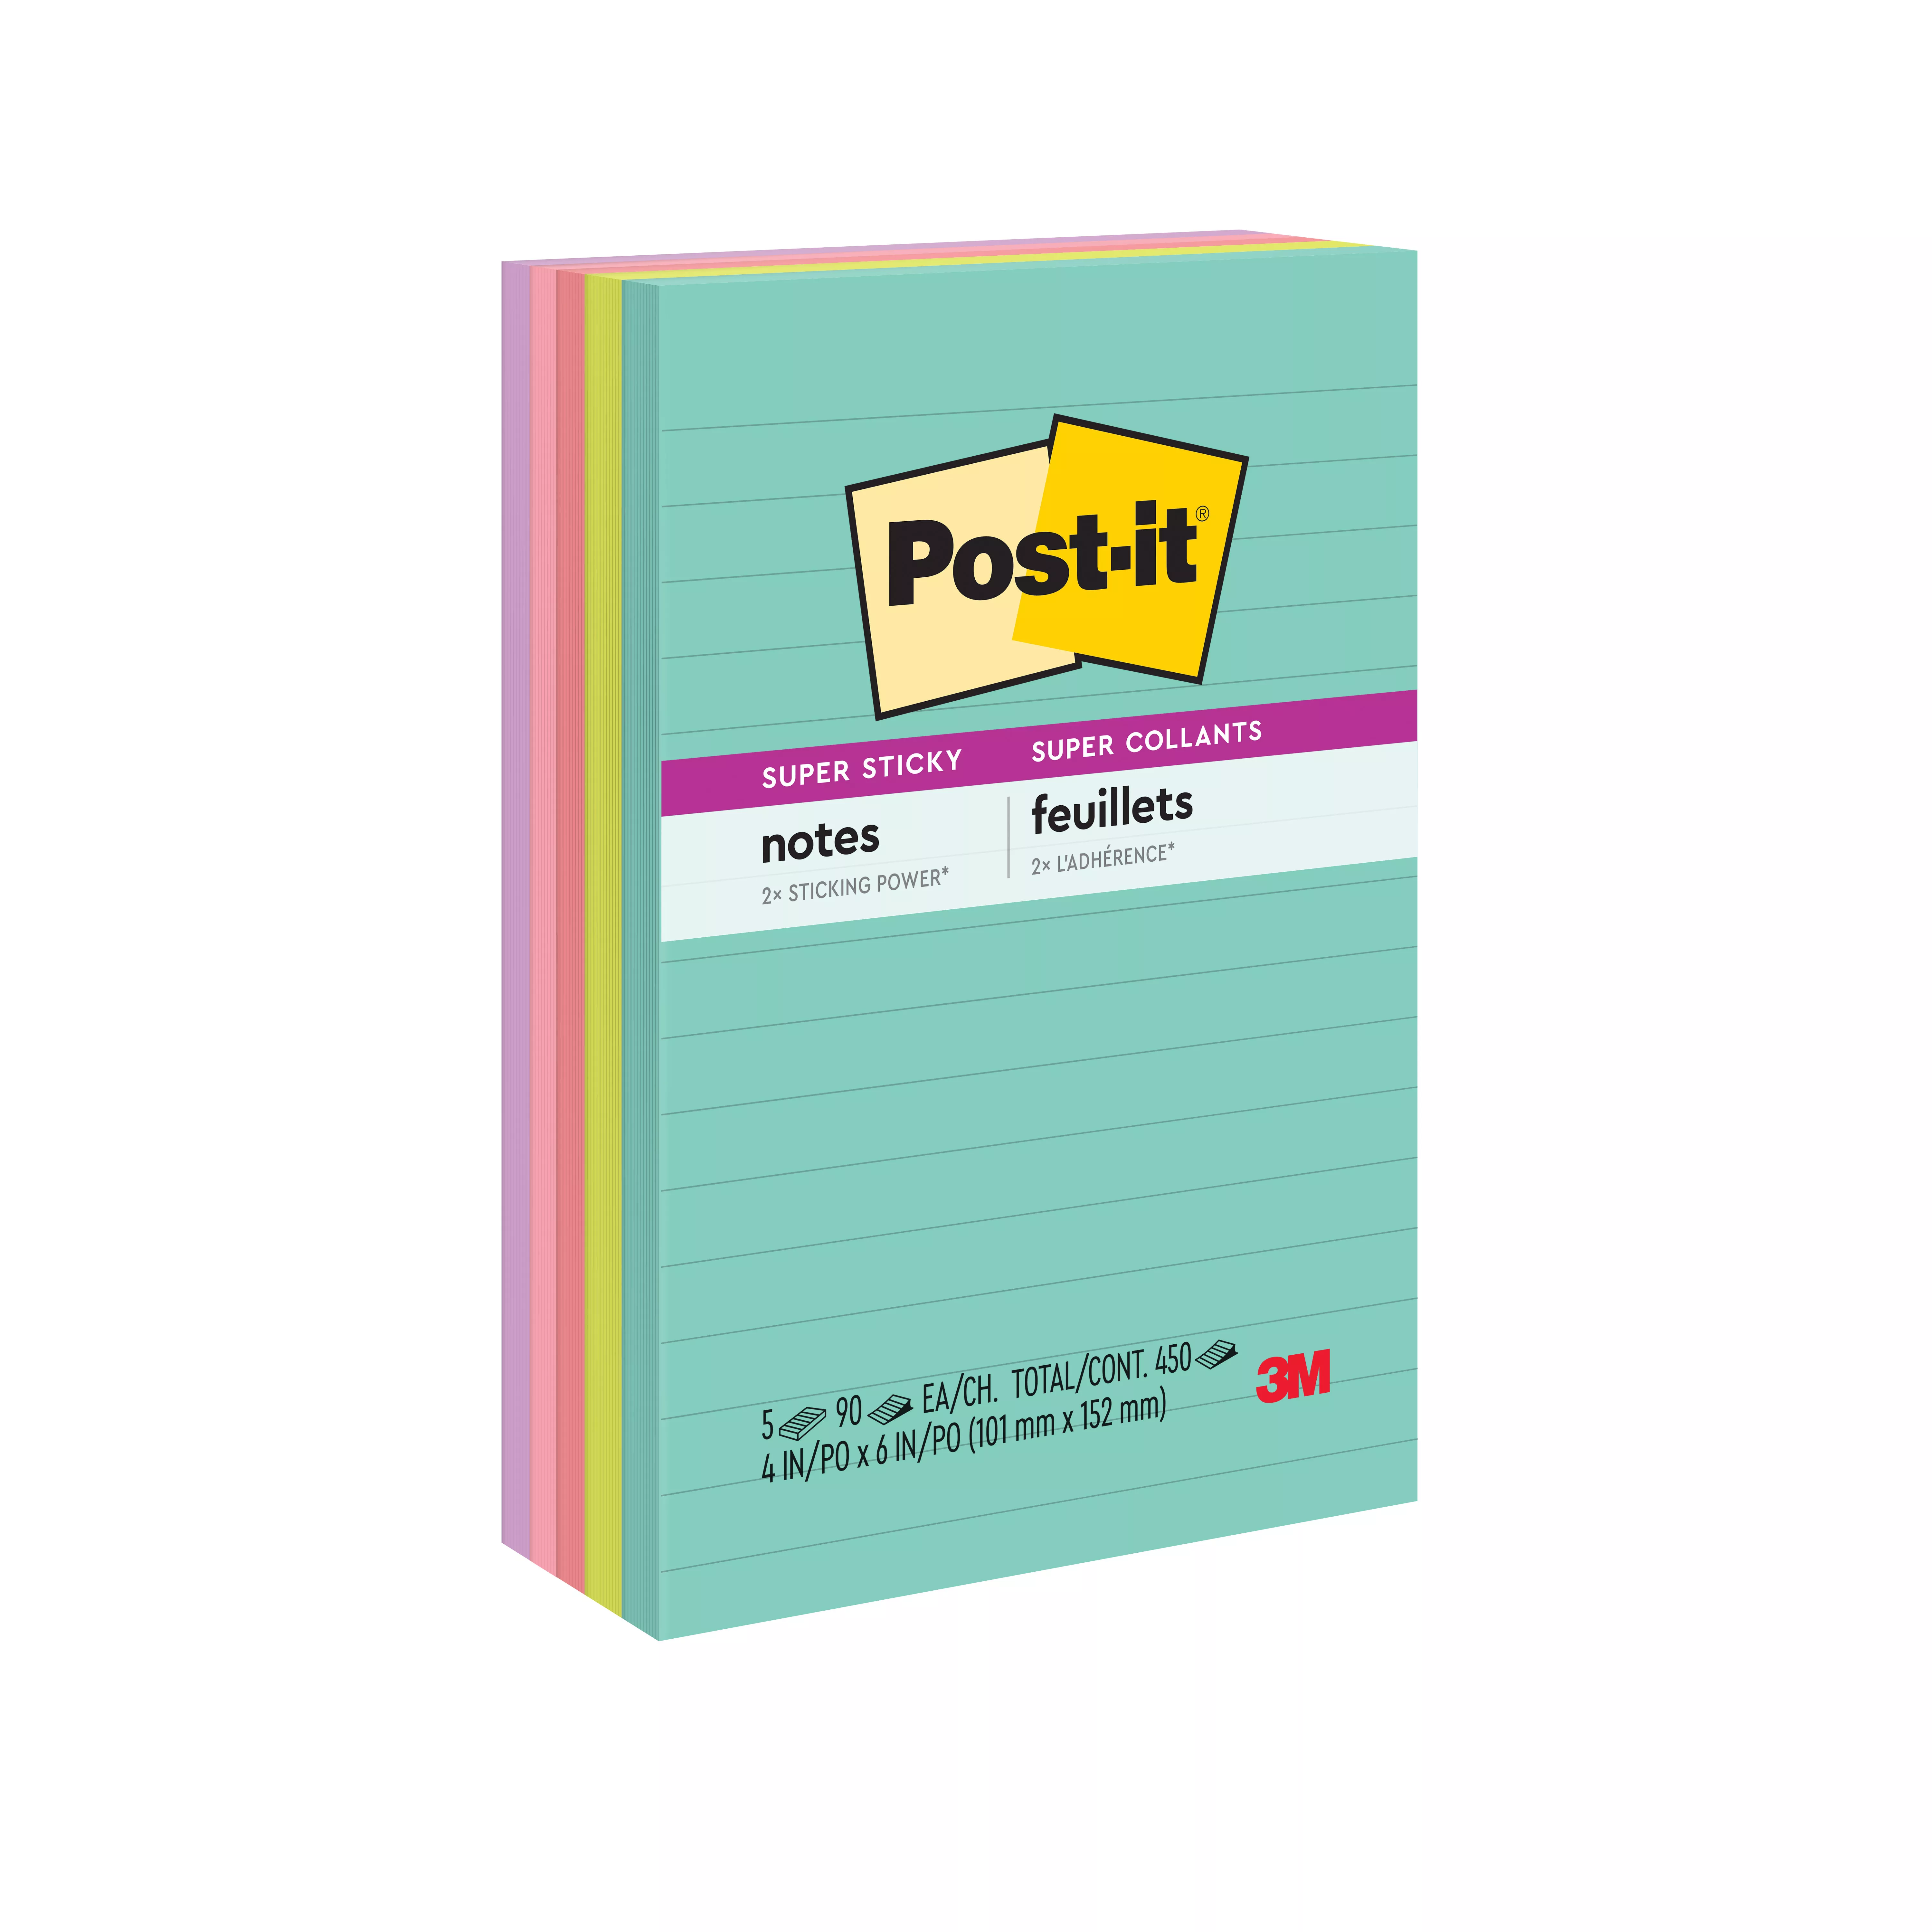 Post-it® Super Sticky Notes 660-5SSMIA, 4 in x 6 in (101 mm x 152 mm), Supernova Neons Collection